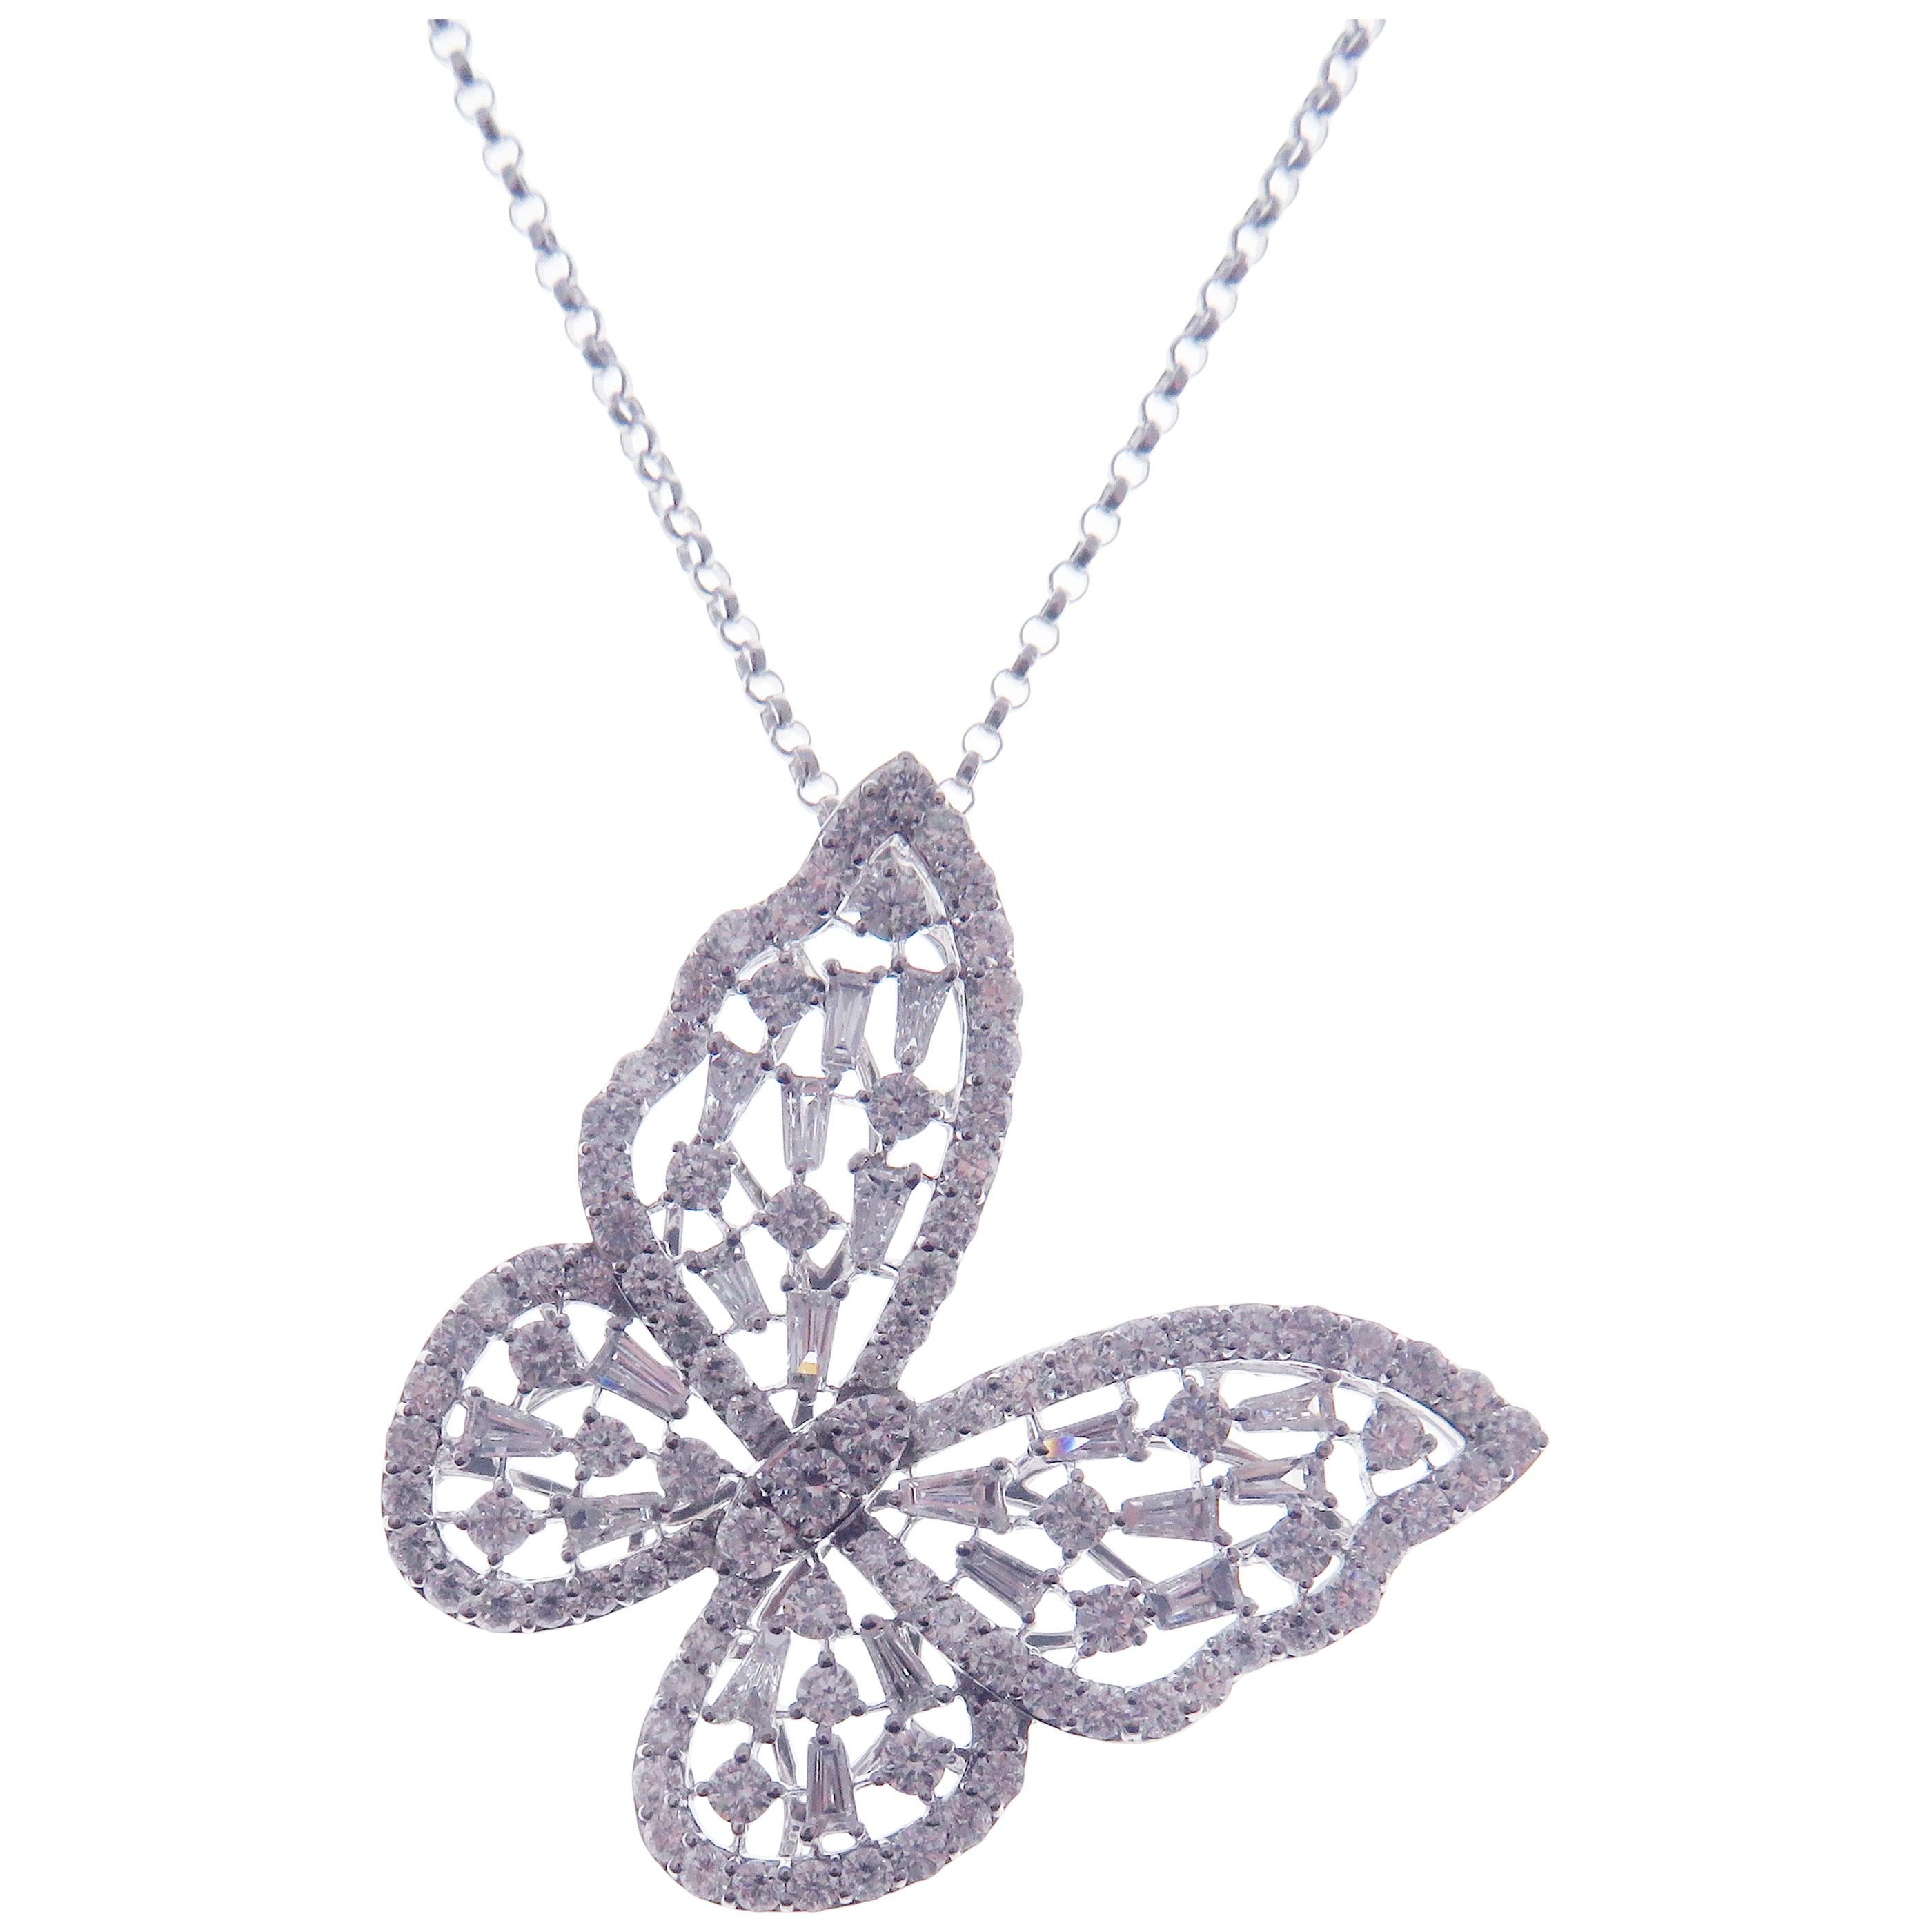 This large butterfly necklace is crafted in 18-karat white gold, featuring 101 round white diamonds totaling of 2.90 carats and 20 baguette white diamonds totaling of 0.96 carats.
You could wear two different positions, straight or